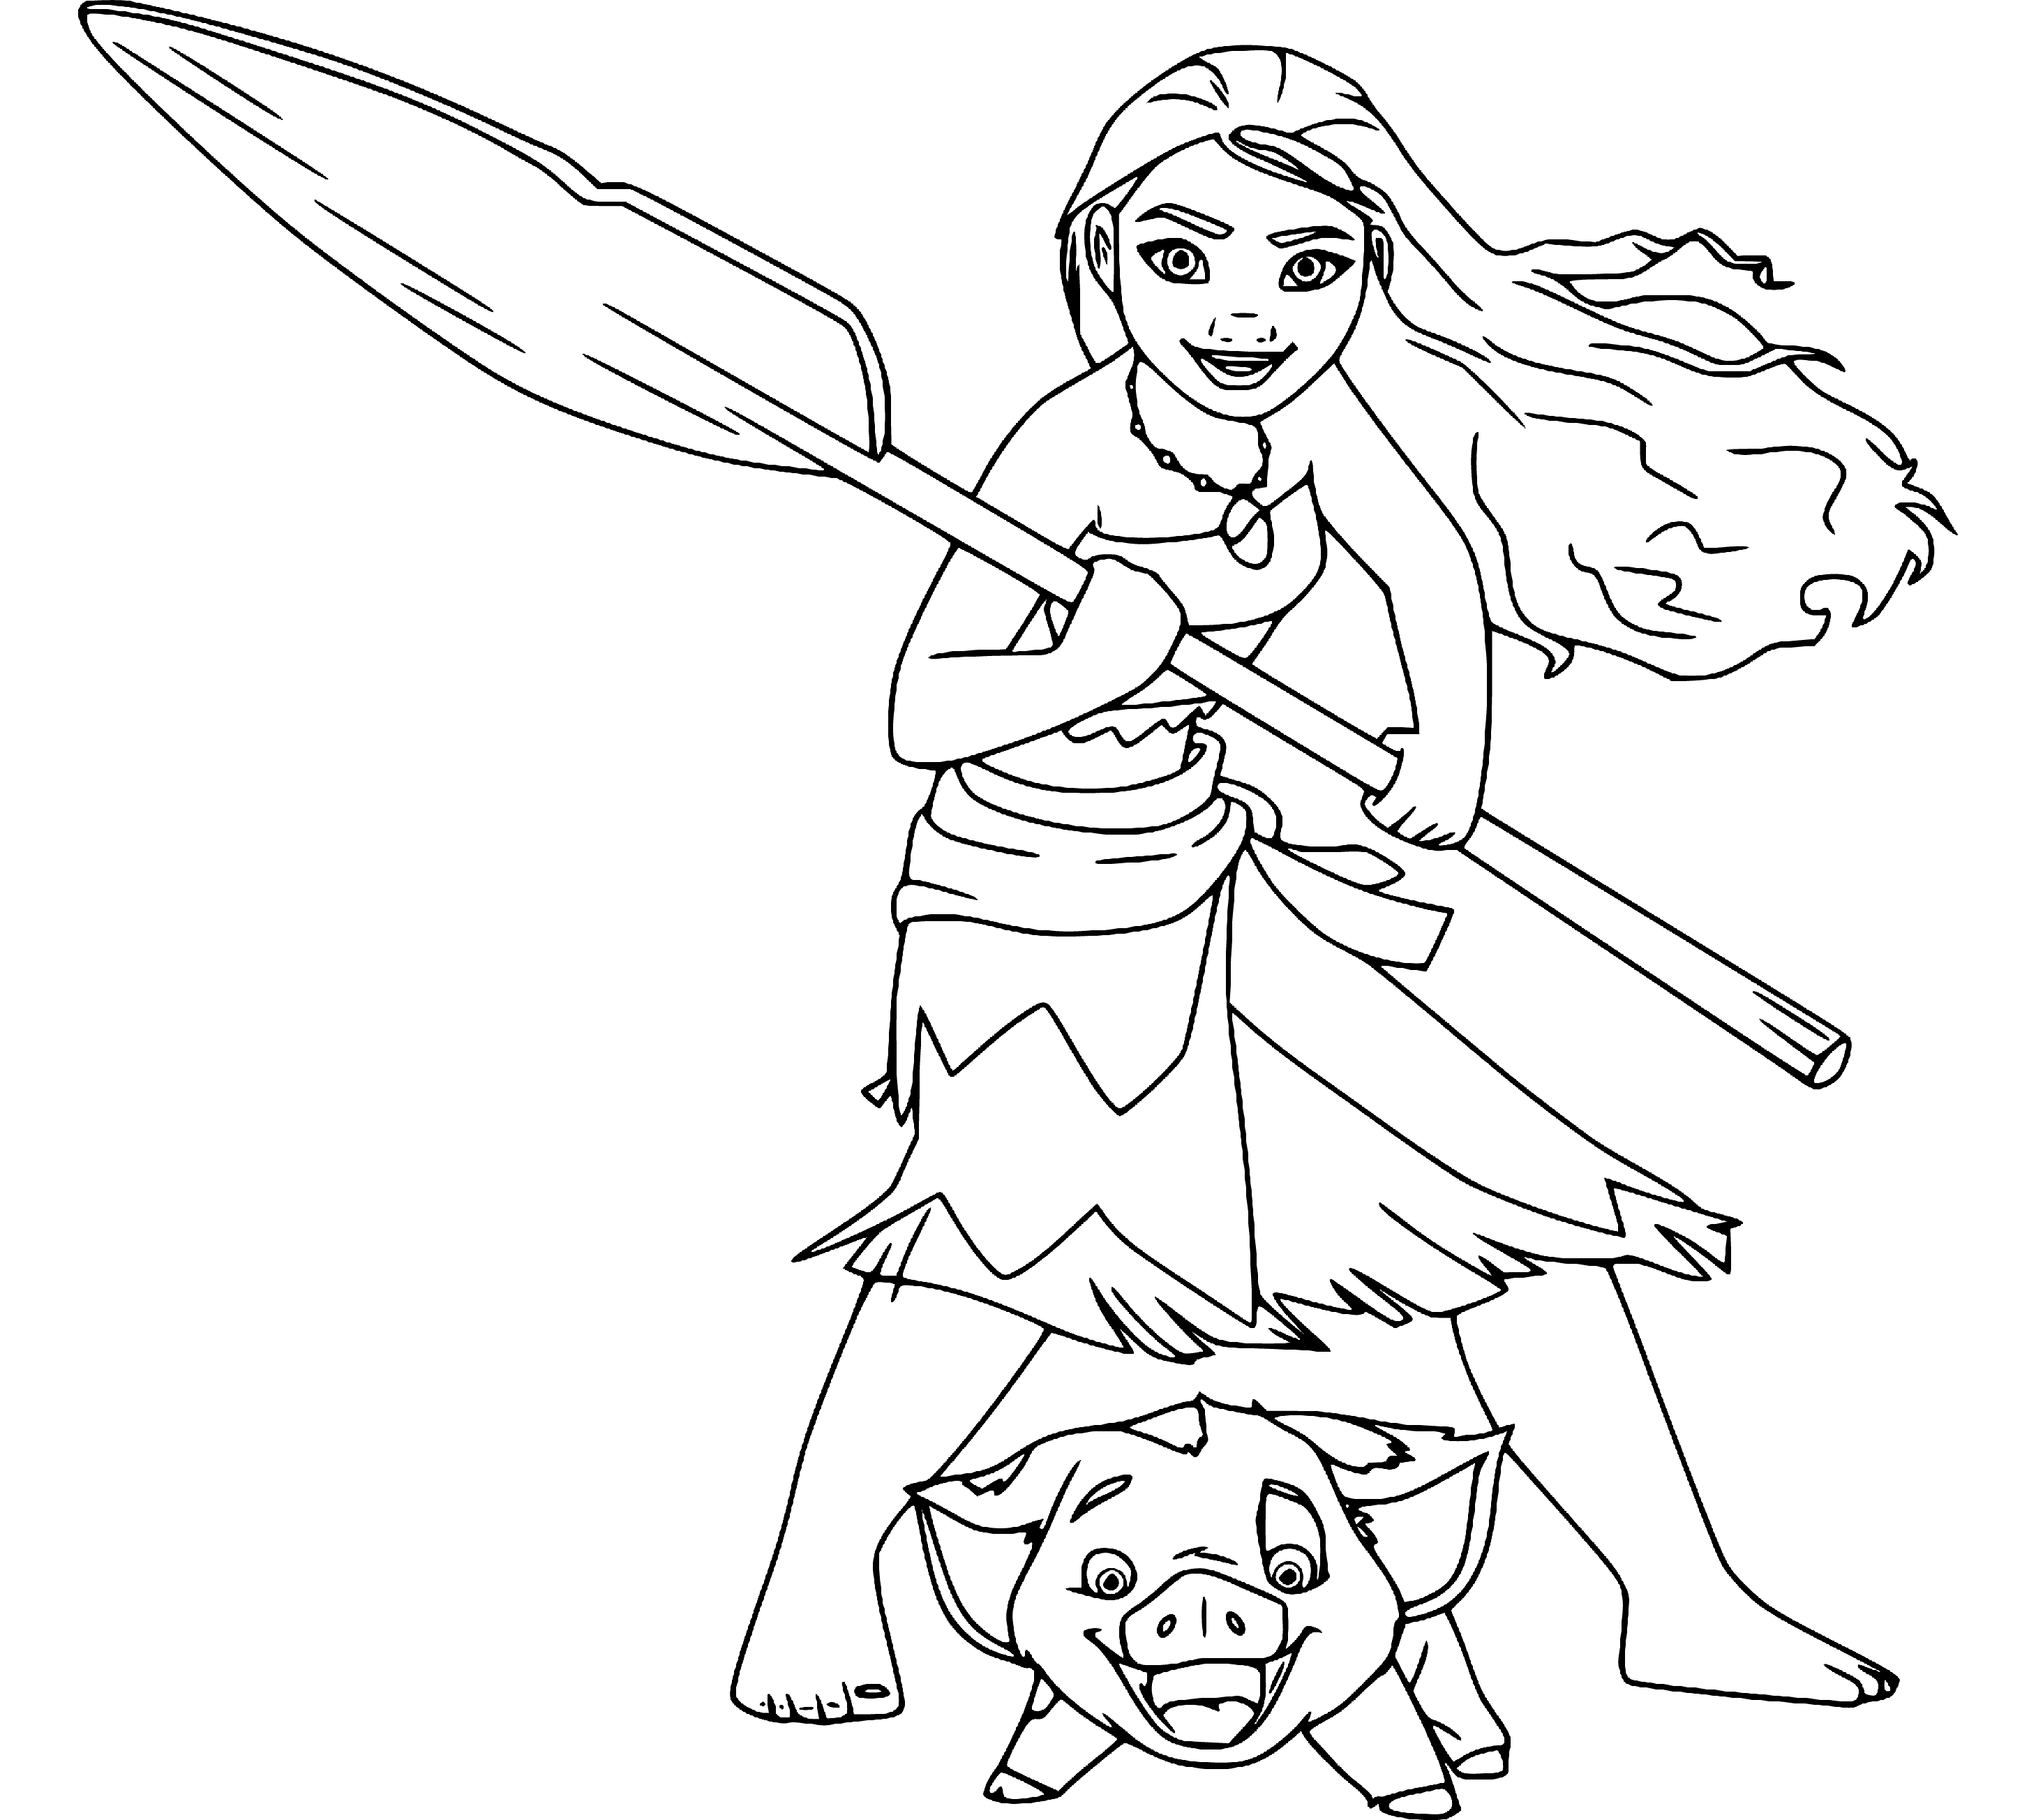 Printable Moana and Pua Pig Coloring Page for kids.